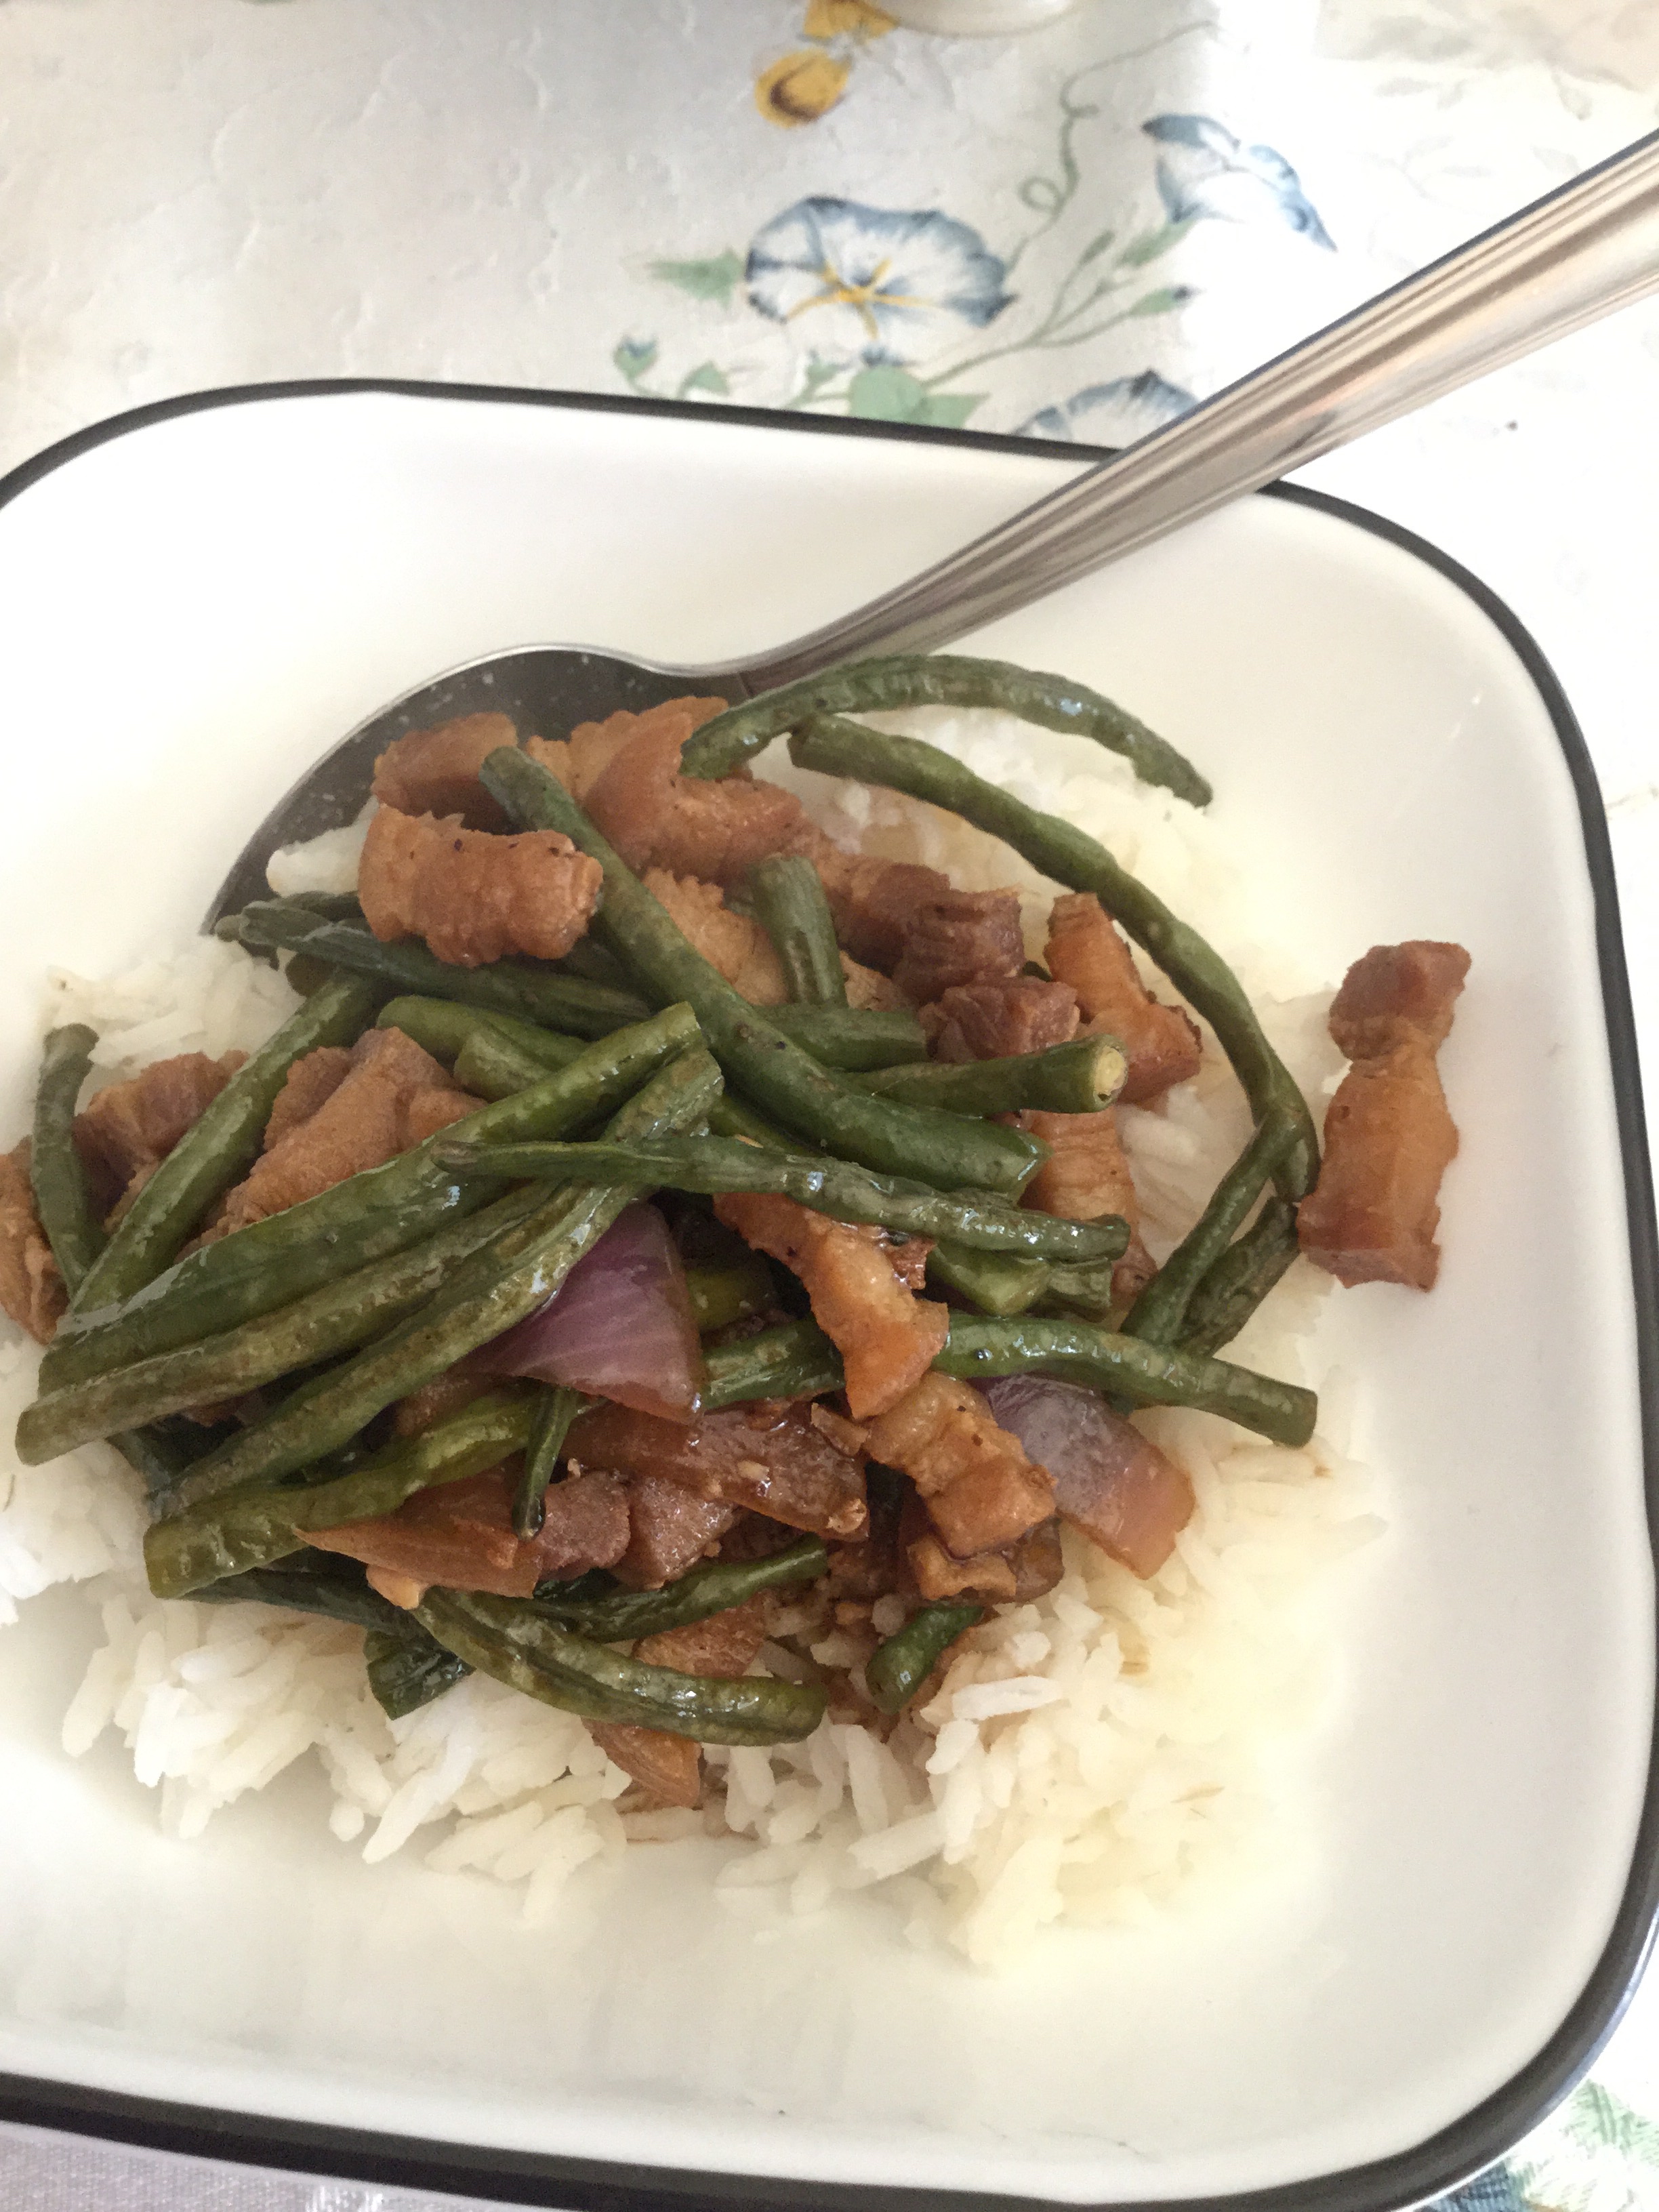 Stir Fry pork belly and string beans (I think it's called snake beans in one of my chinese cookbook)